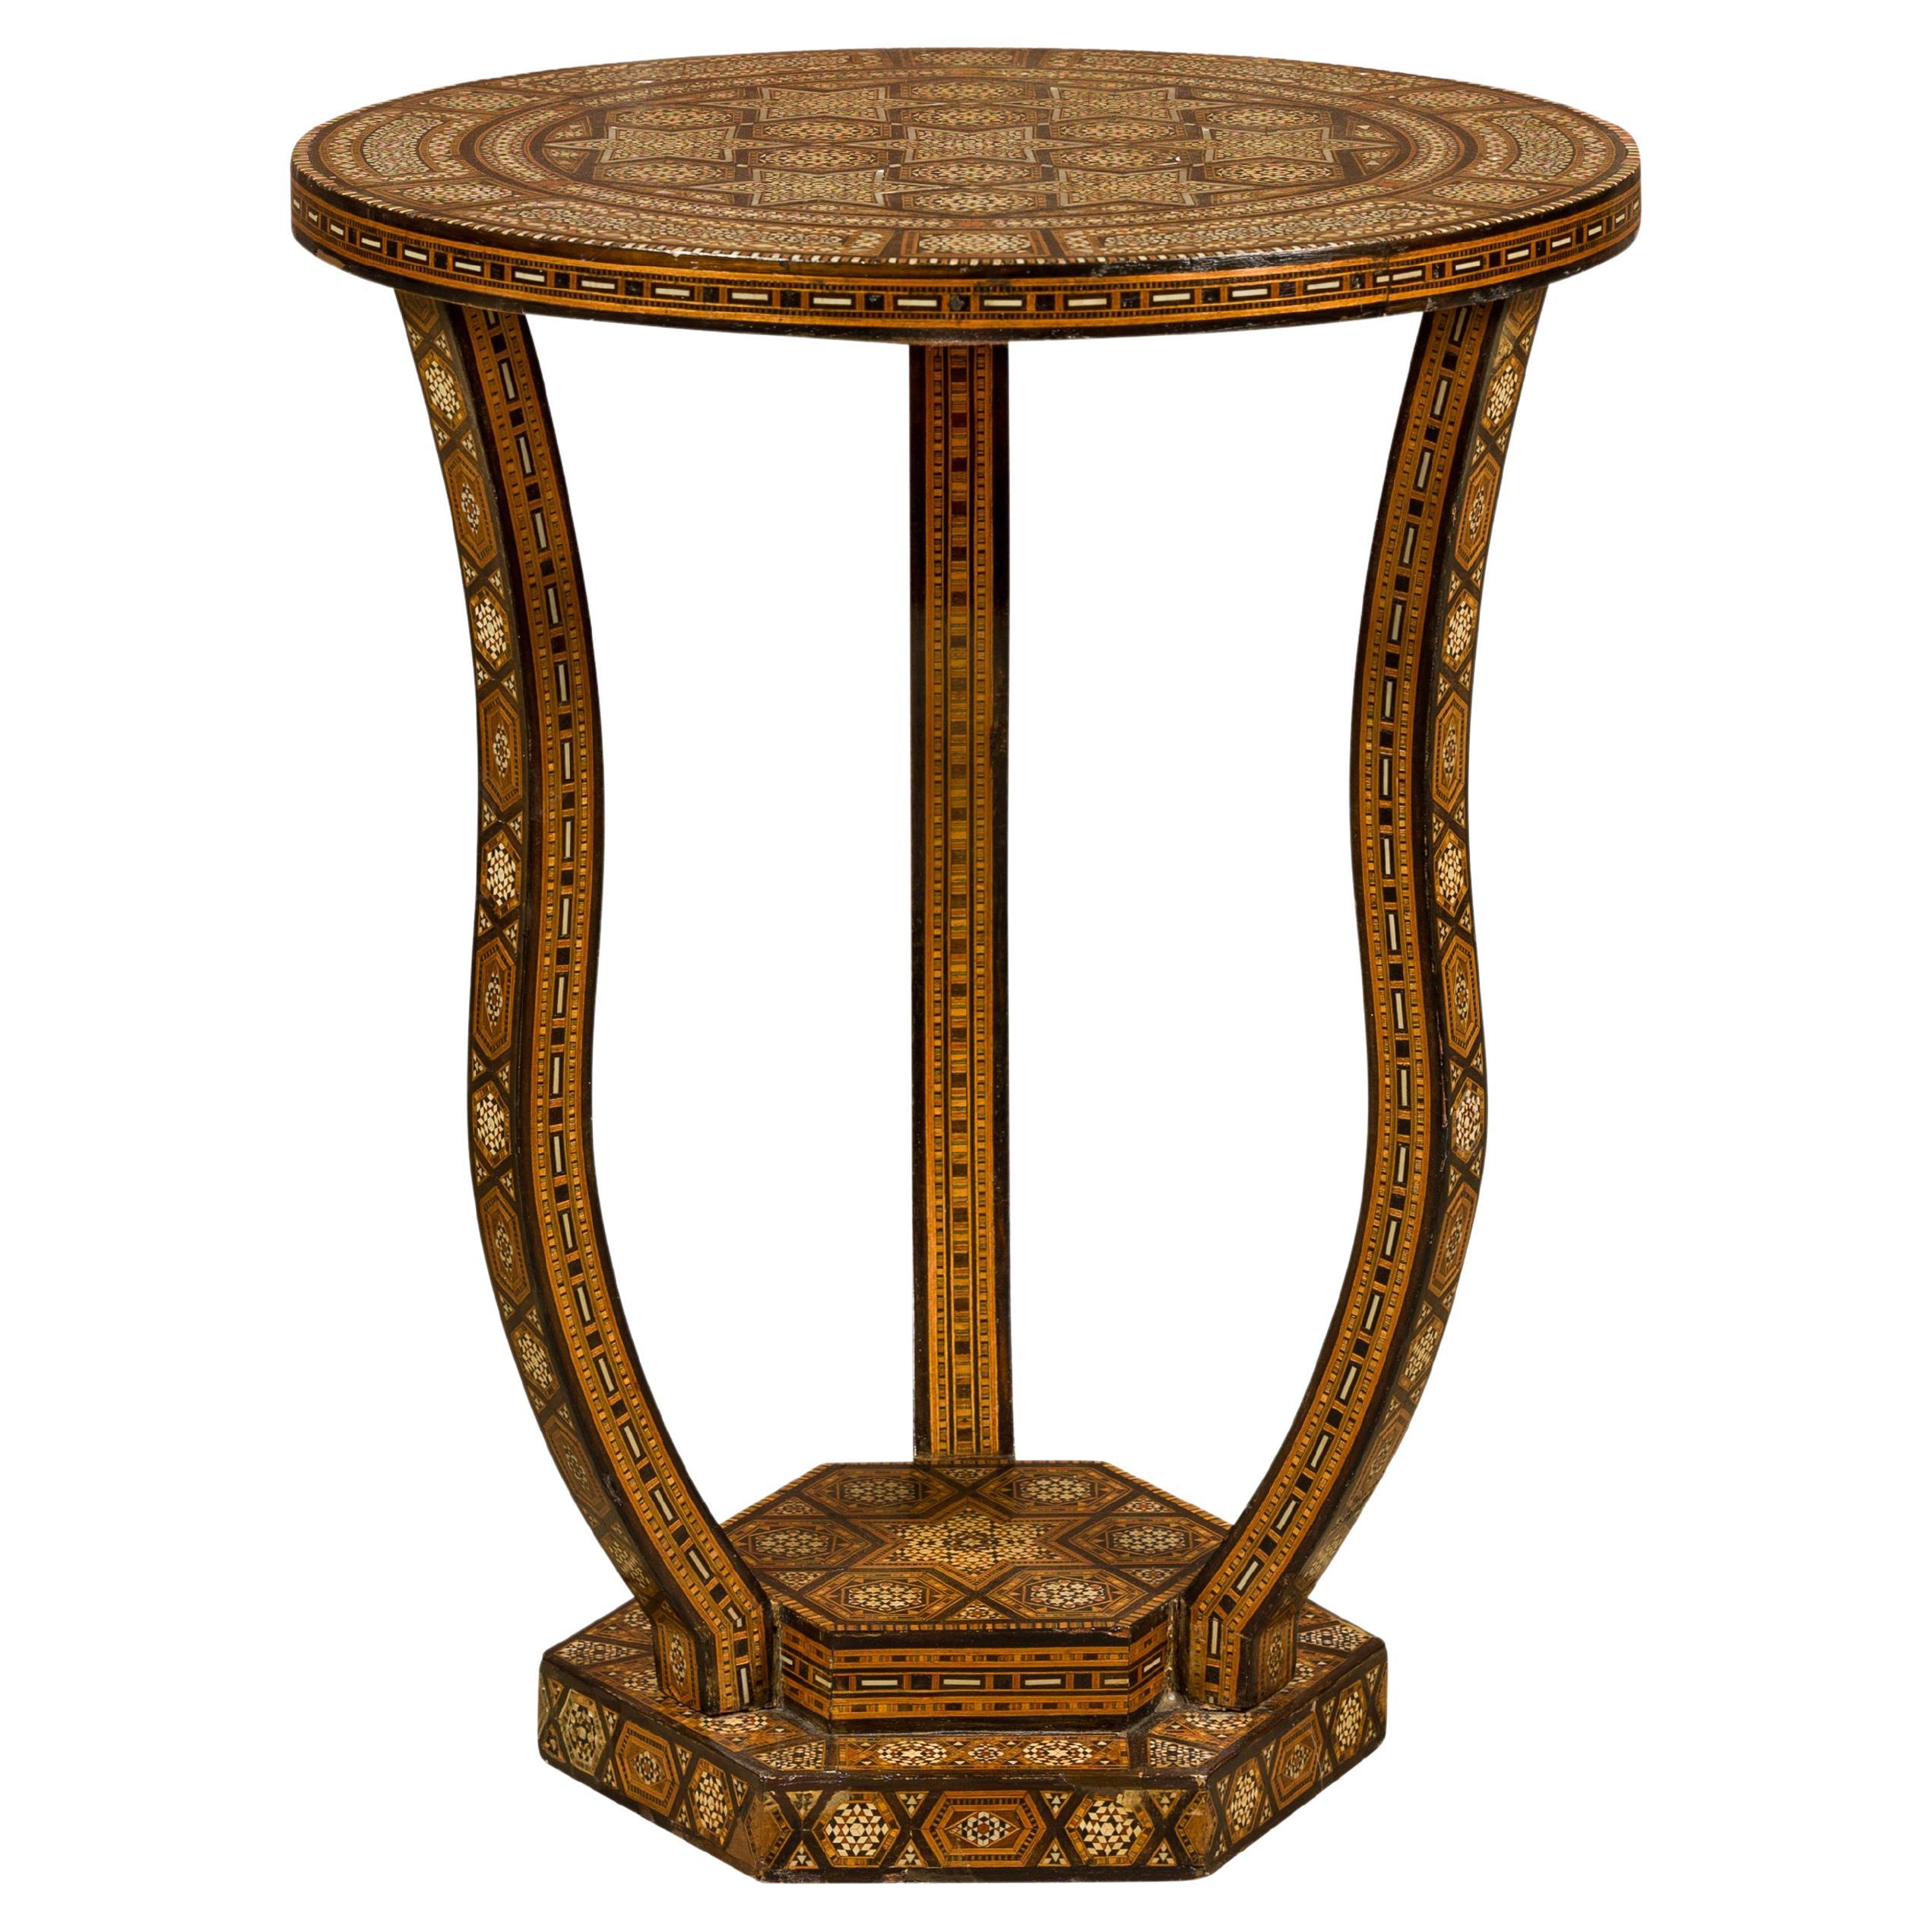 Moroccan 1900s Moorish Style Table with Geometric Bone Inlay and Curving Legs For Sale